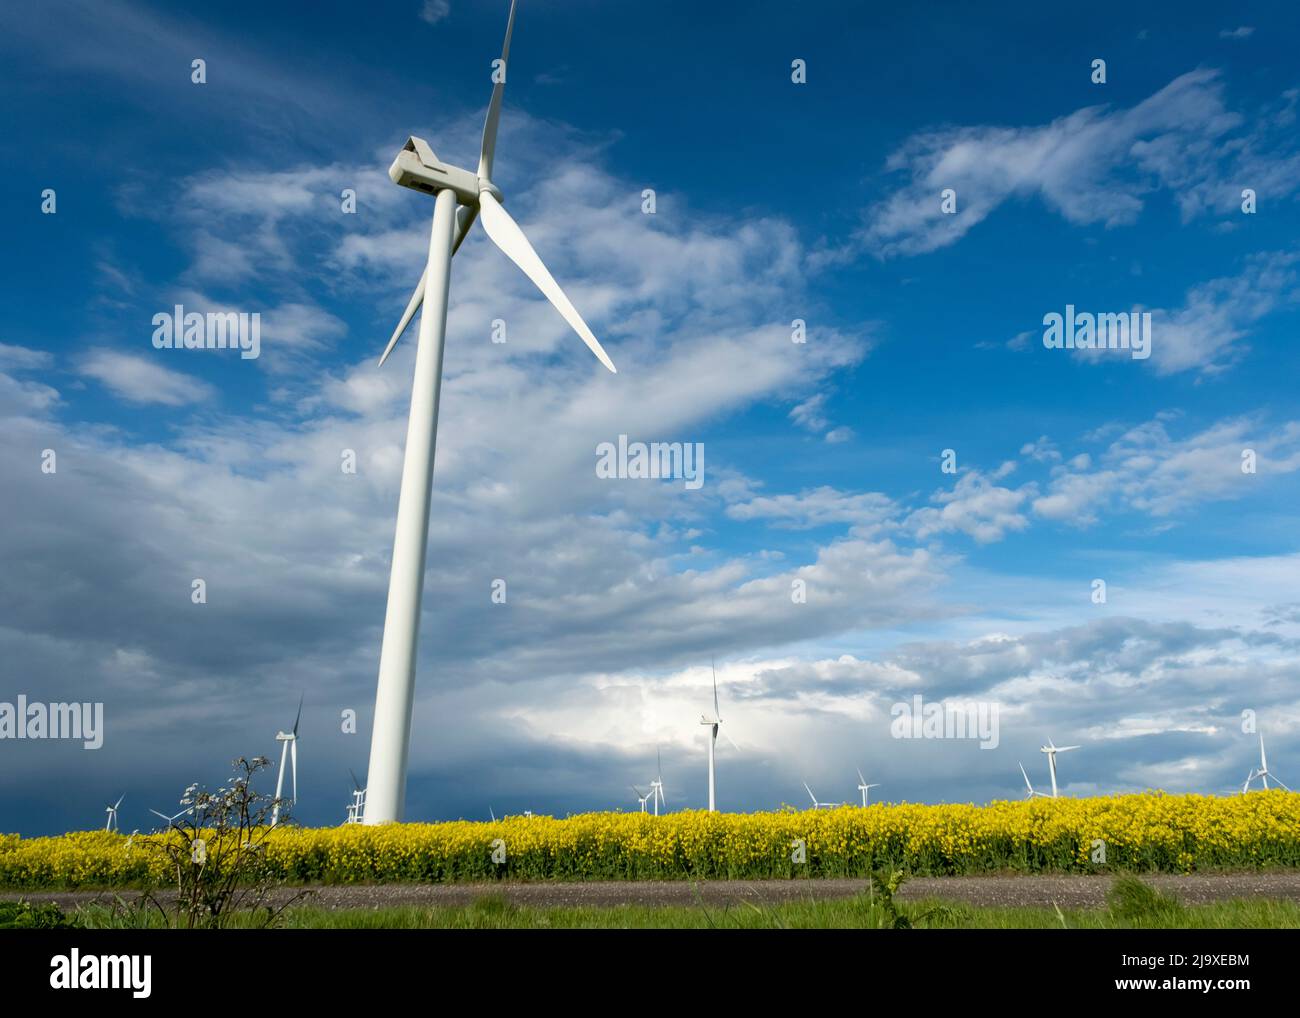 Wind turbines set in farm fields groing rapeseed with a cloudy summer sky behind Stock Photo